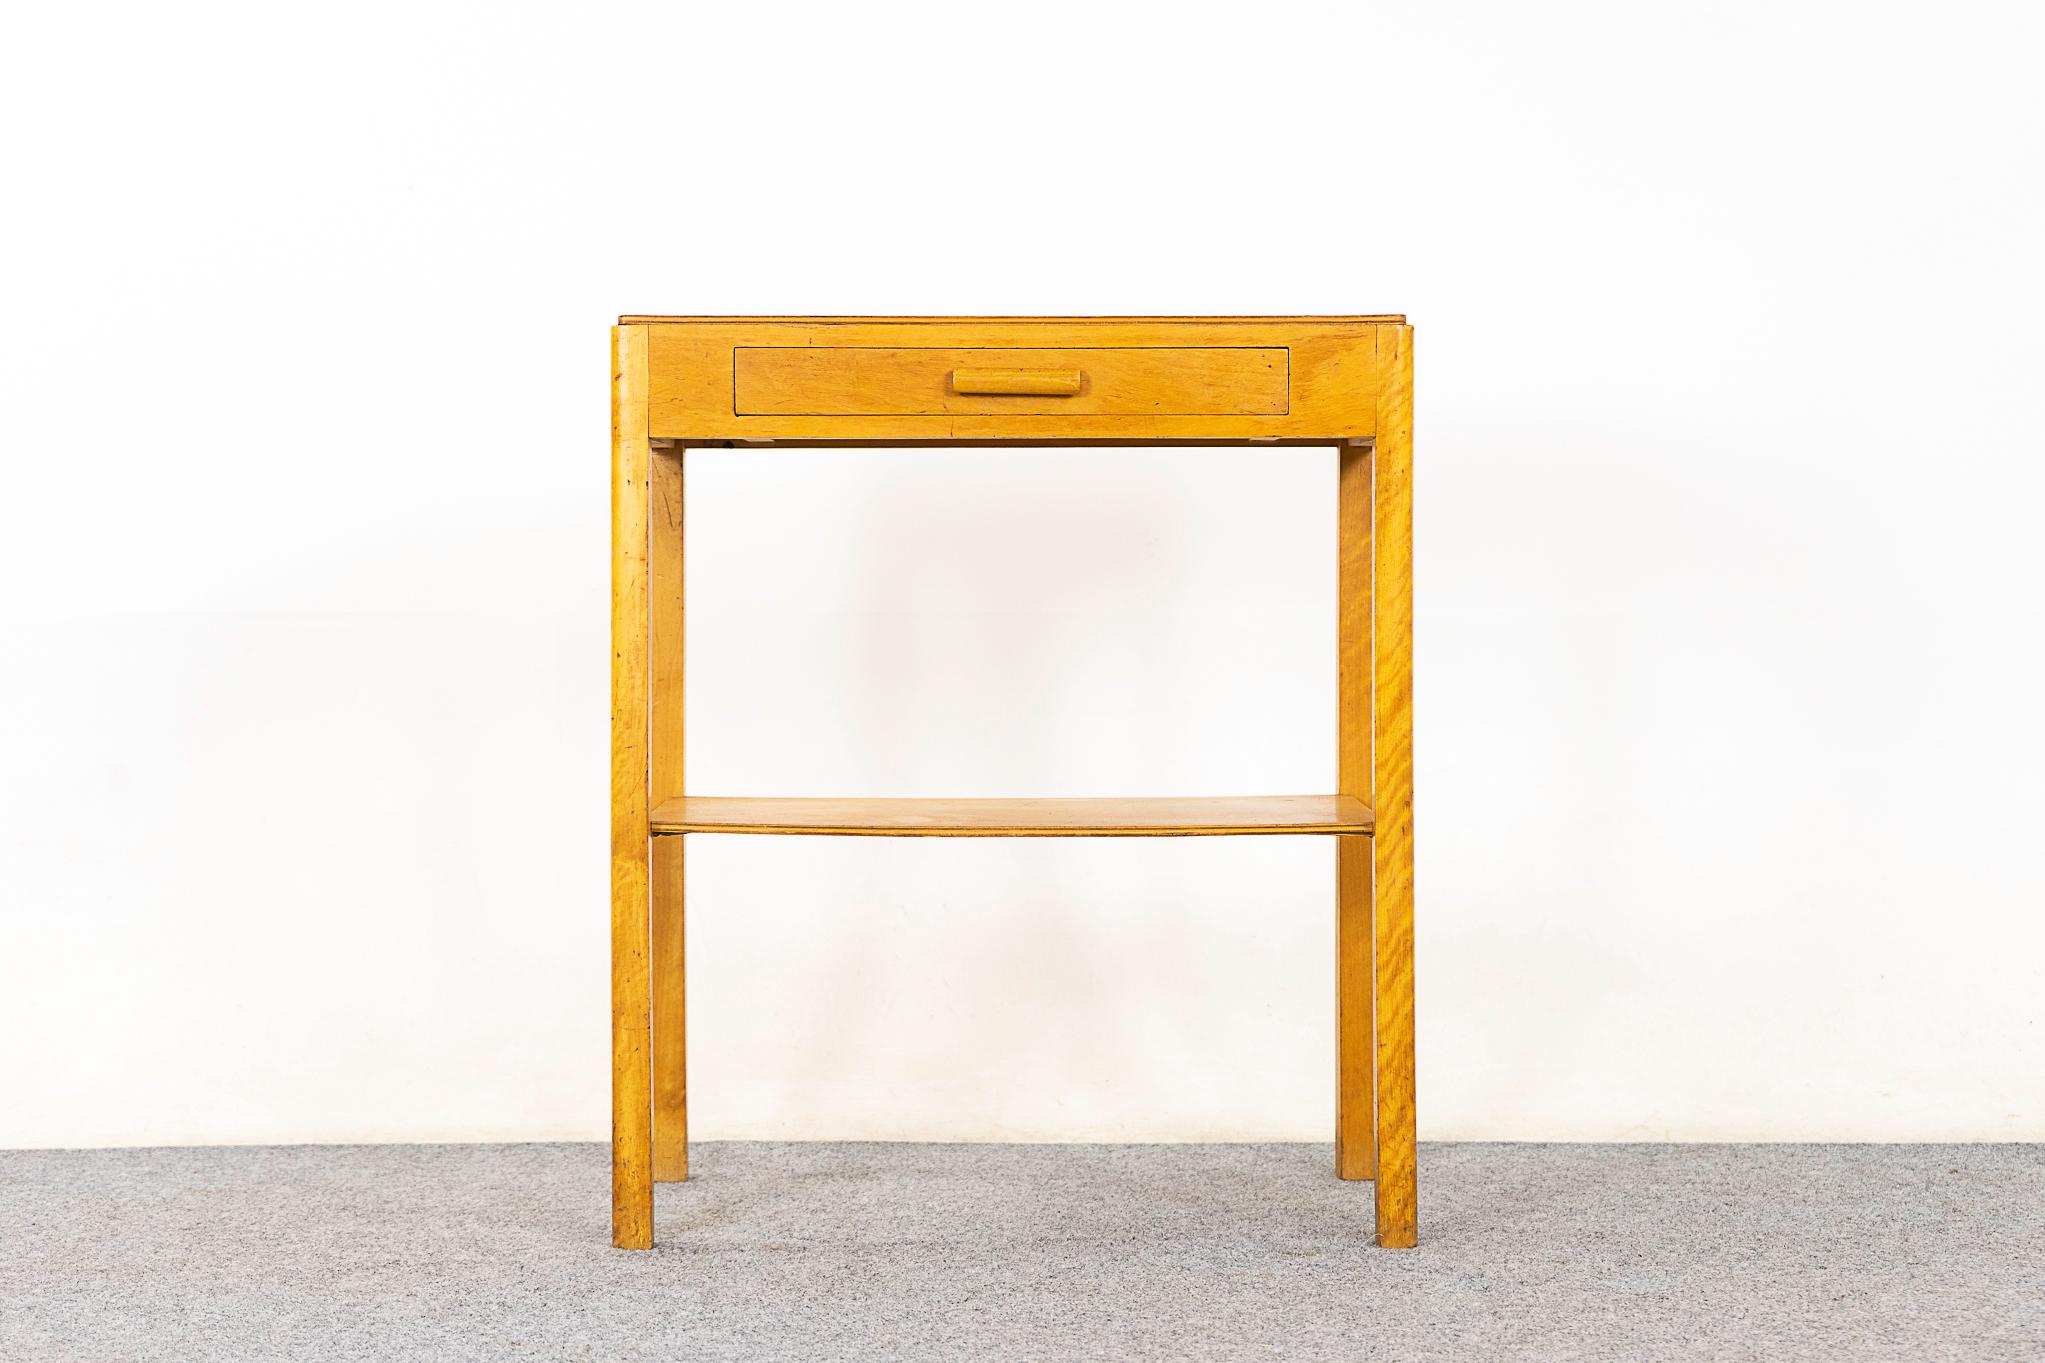 Maple mid-century bedside table, circa 1960's. Veneered case with slender legs, practicle shelf and sleek dovetailed drawer.

Unrestored item with option to purchase in restored condition for an additional $100 USD. Restoration includes: repairs,